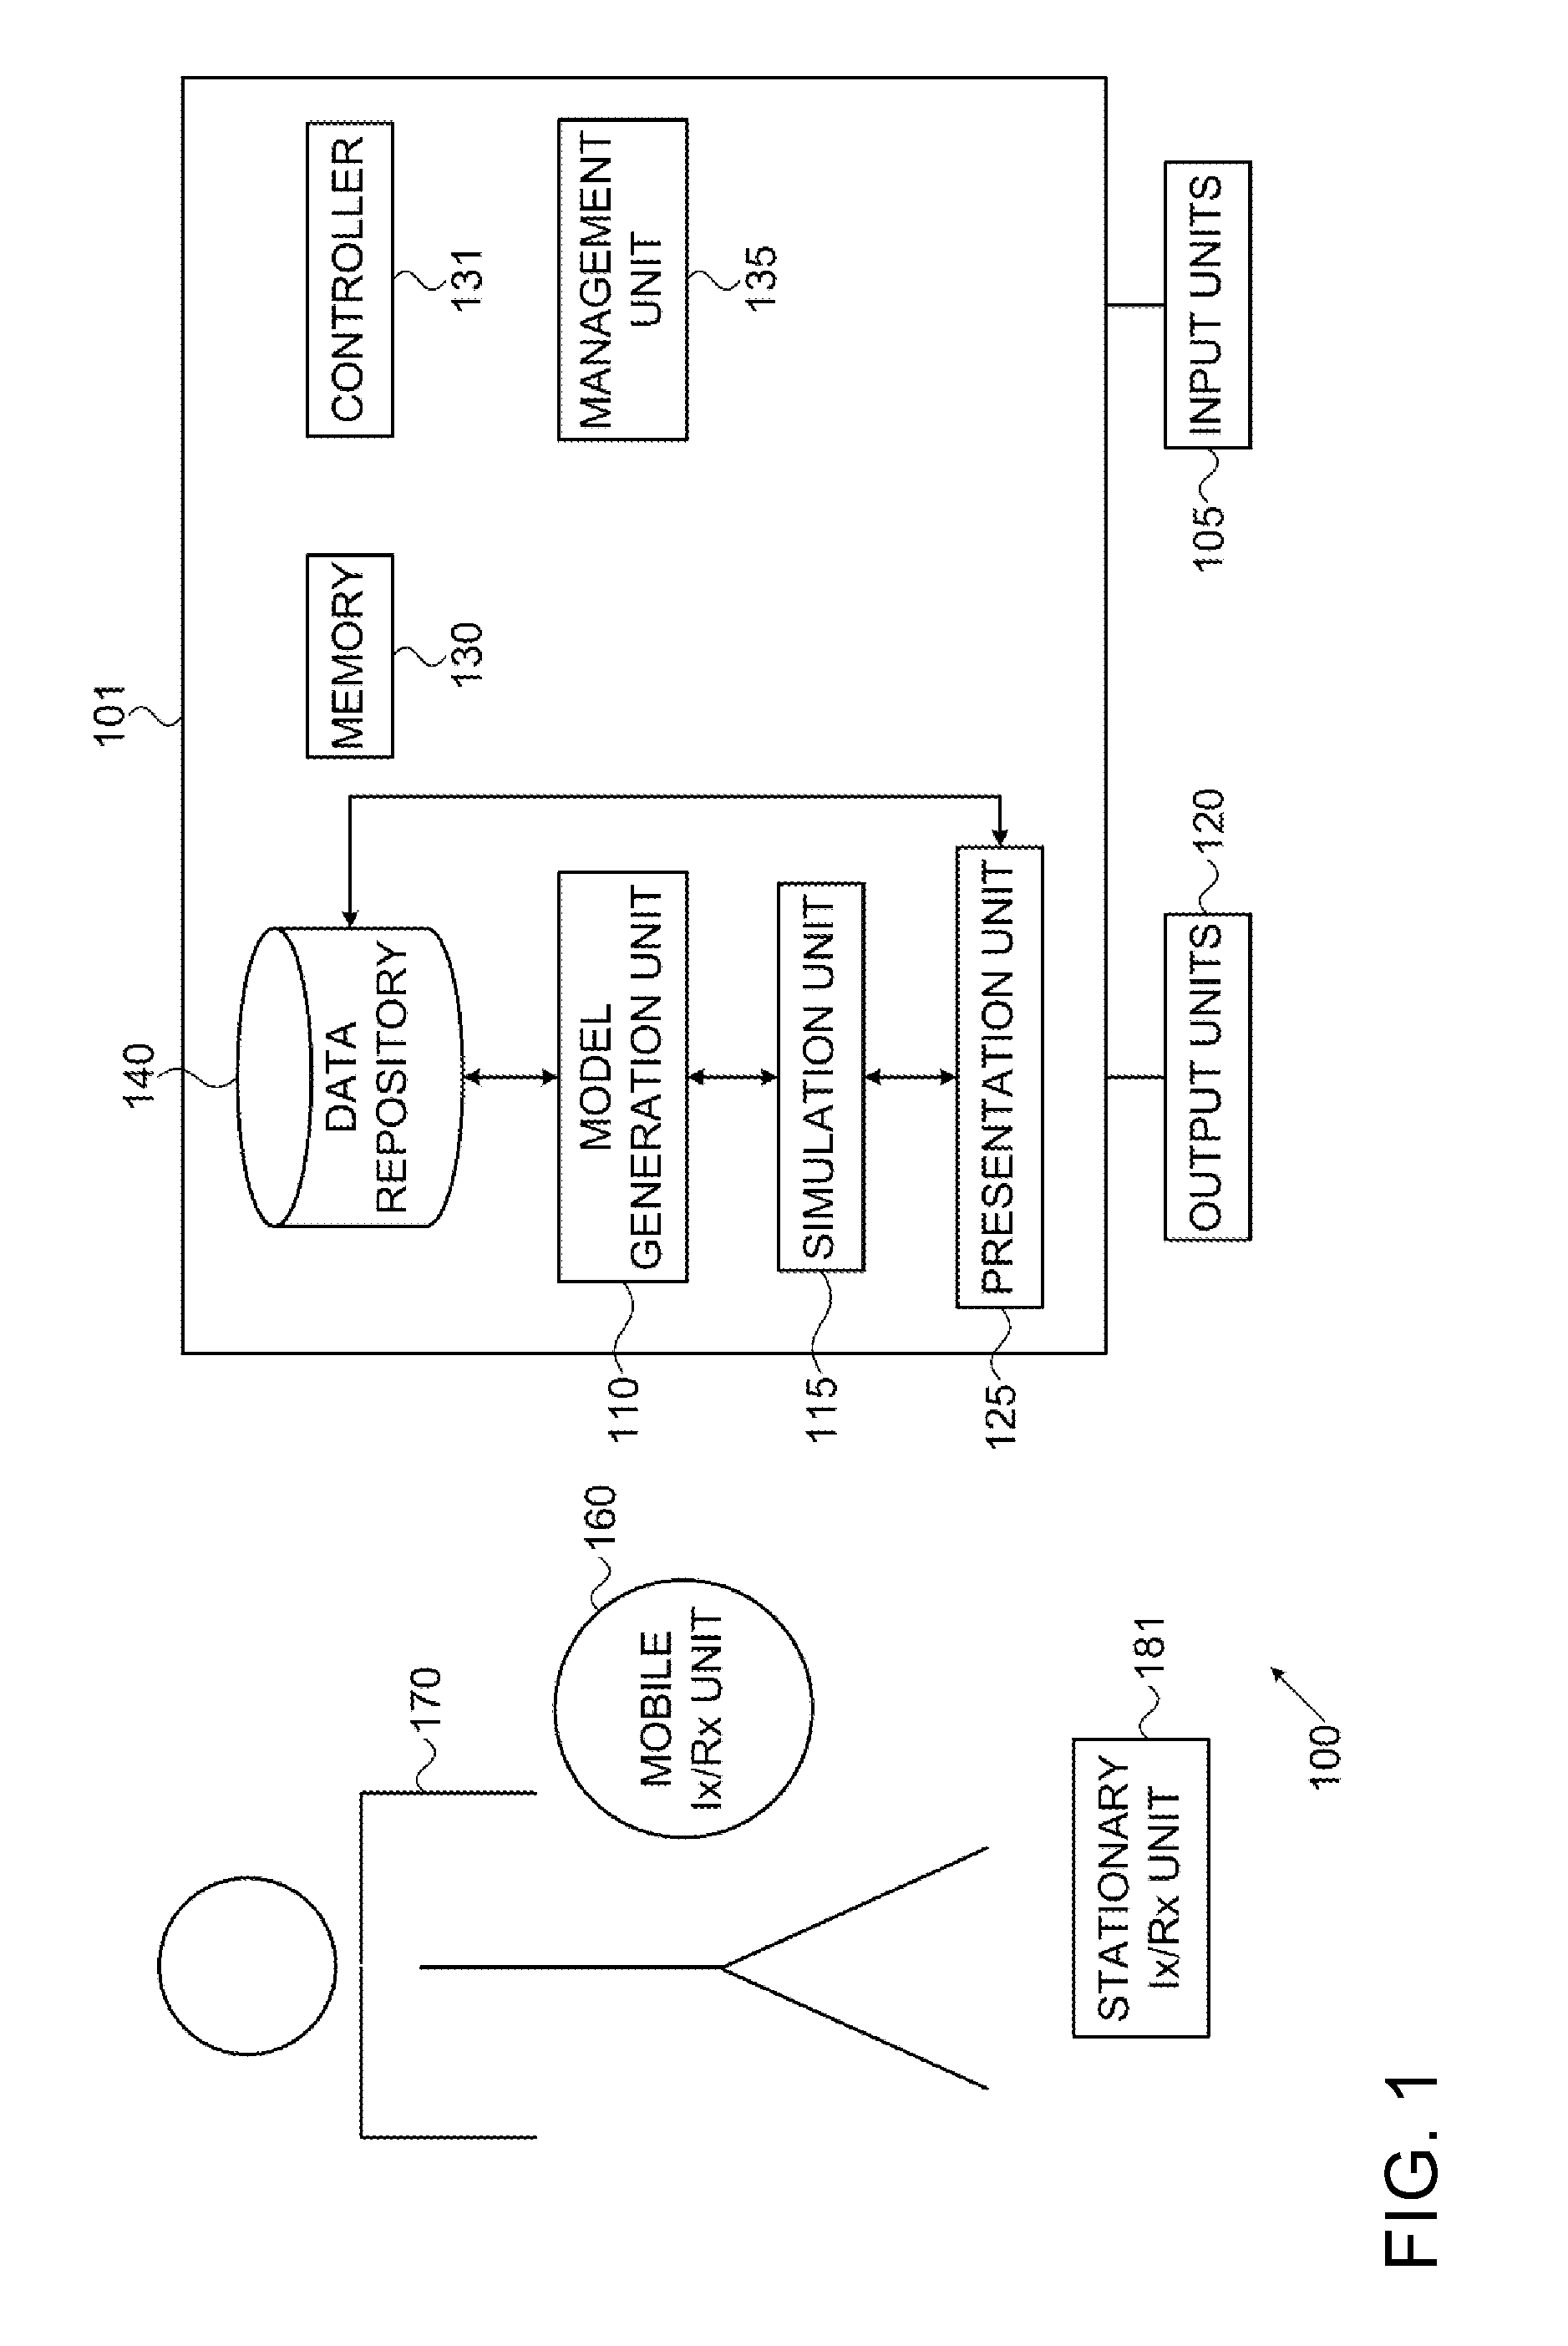 System and method for performing a hybrid simulation of a medical procedure